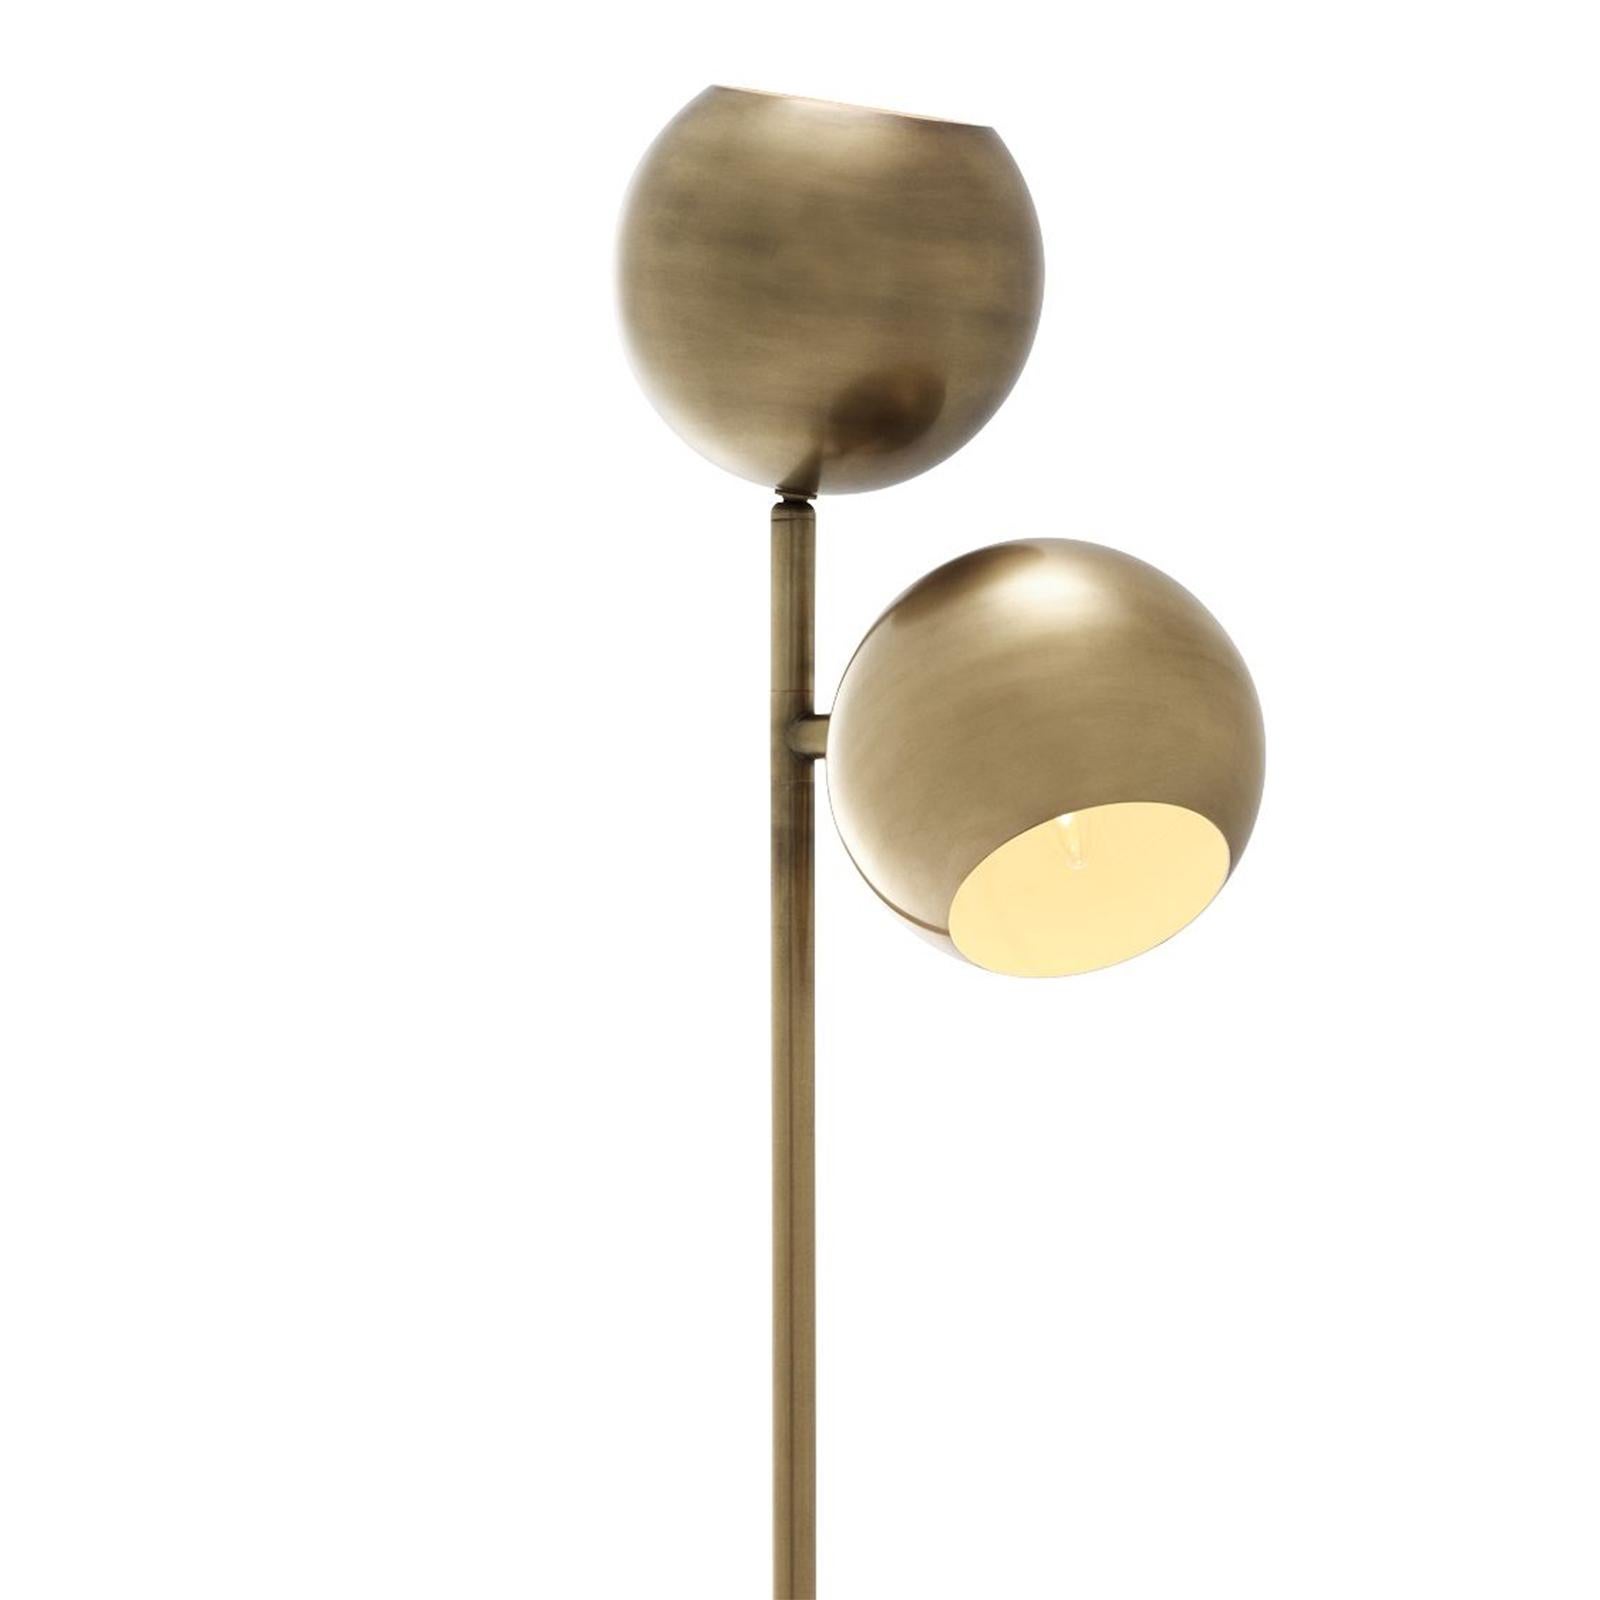 Floor lamp twin with structure in solid brass in
vintage finish on black granite base. 2 bulbs, lamp
holder type E14, max 25 watt. Bulbs not included.
Also available in nickel finish. Also available in Twin
Table lamp.